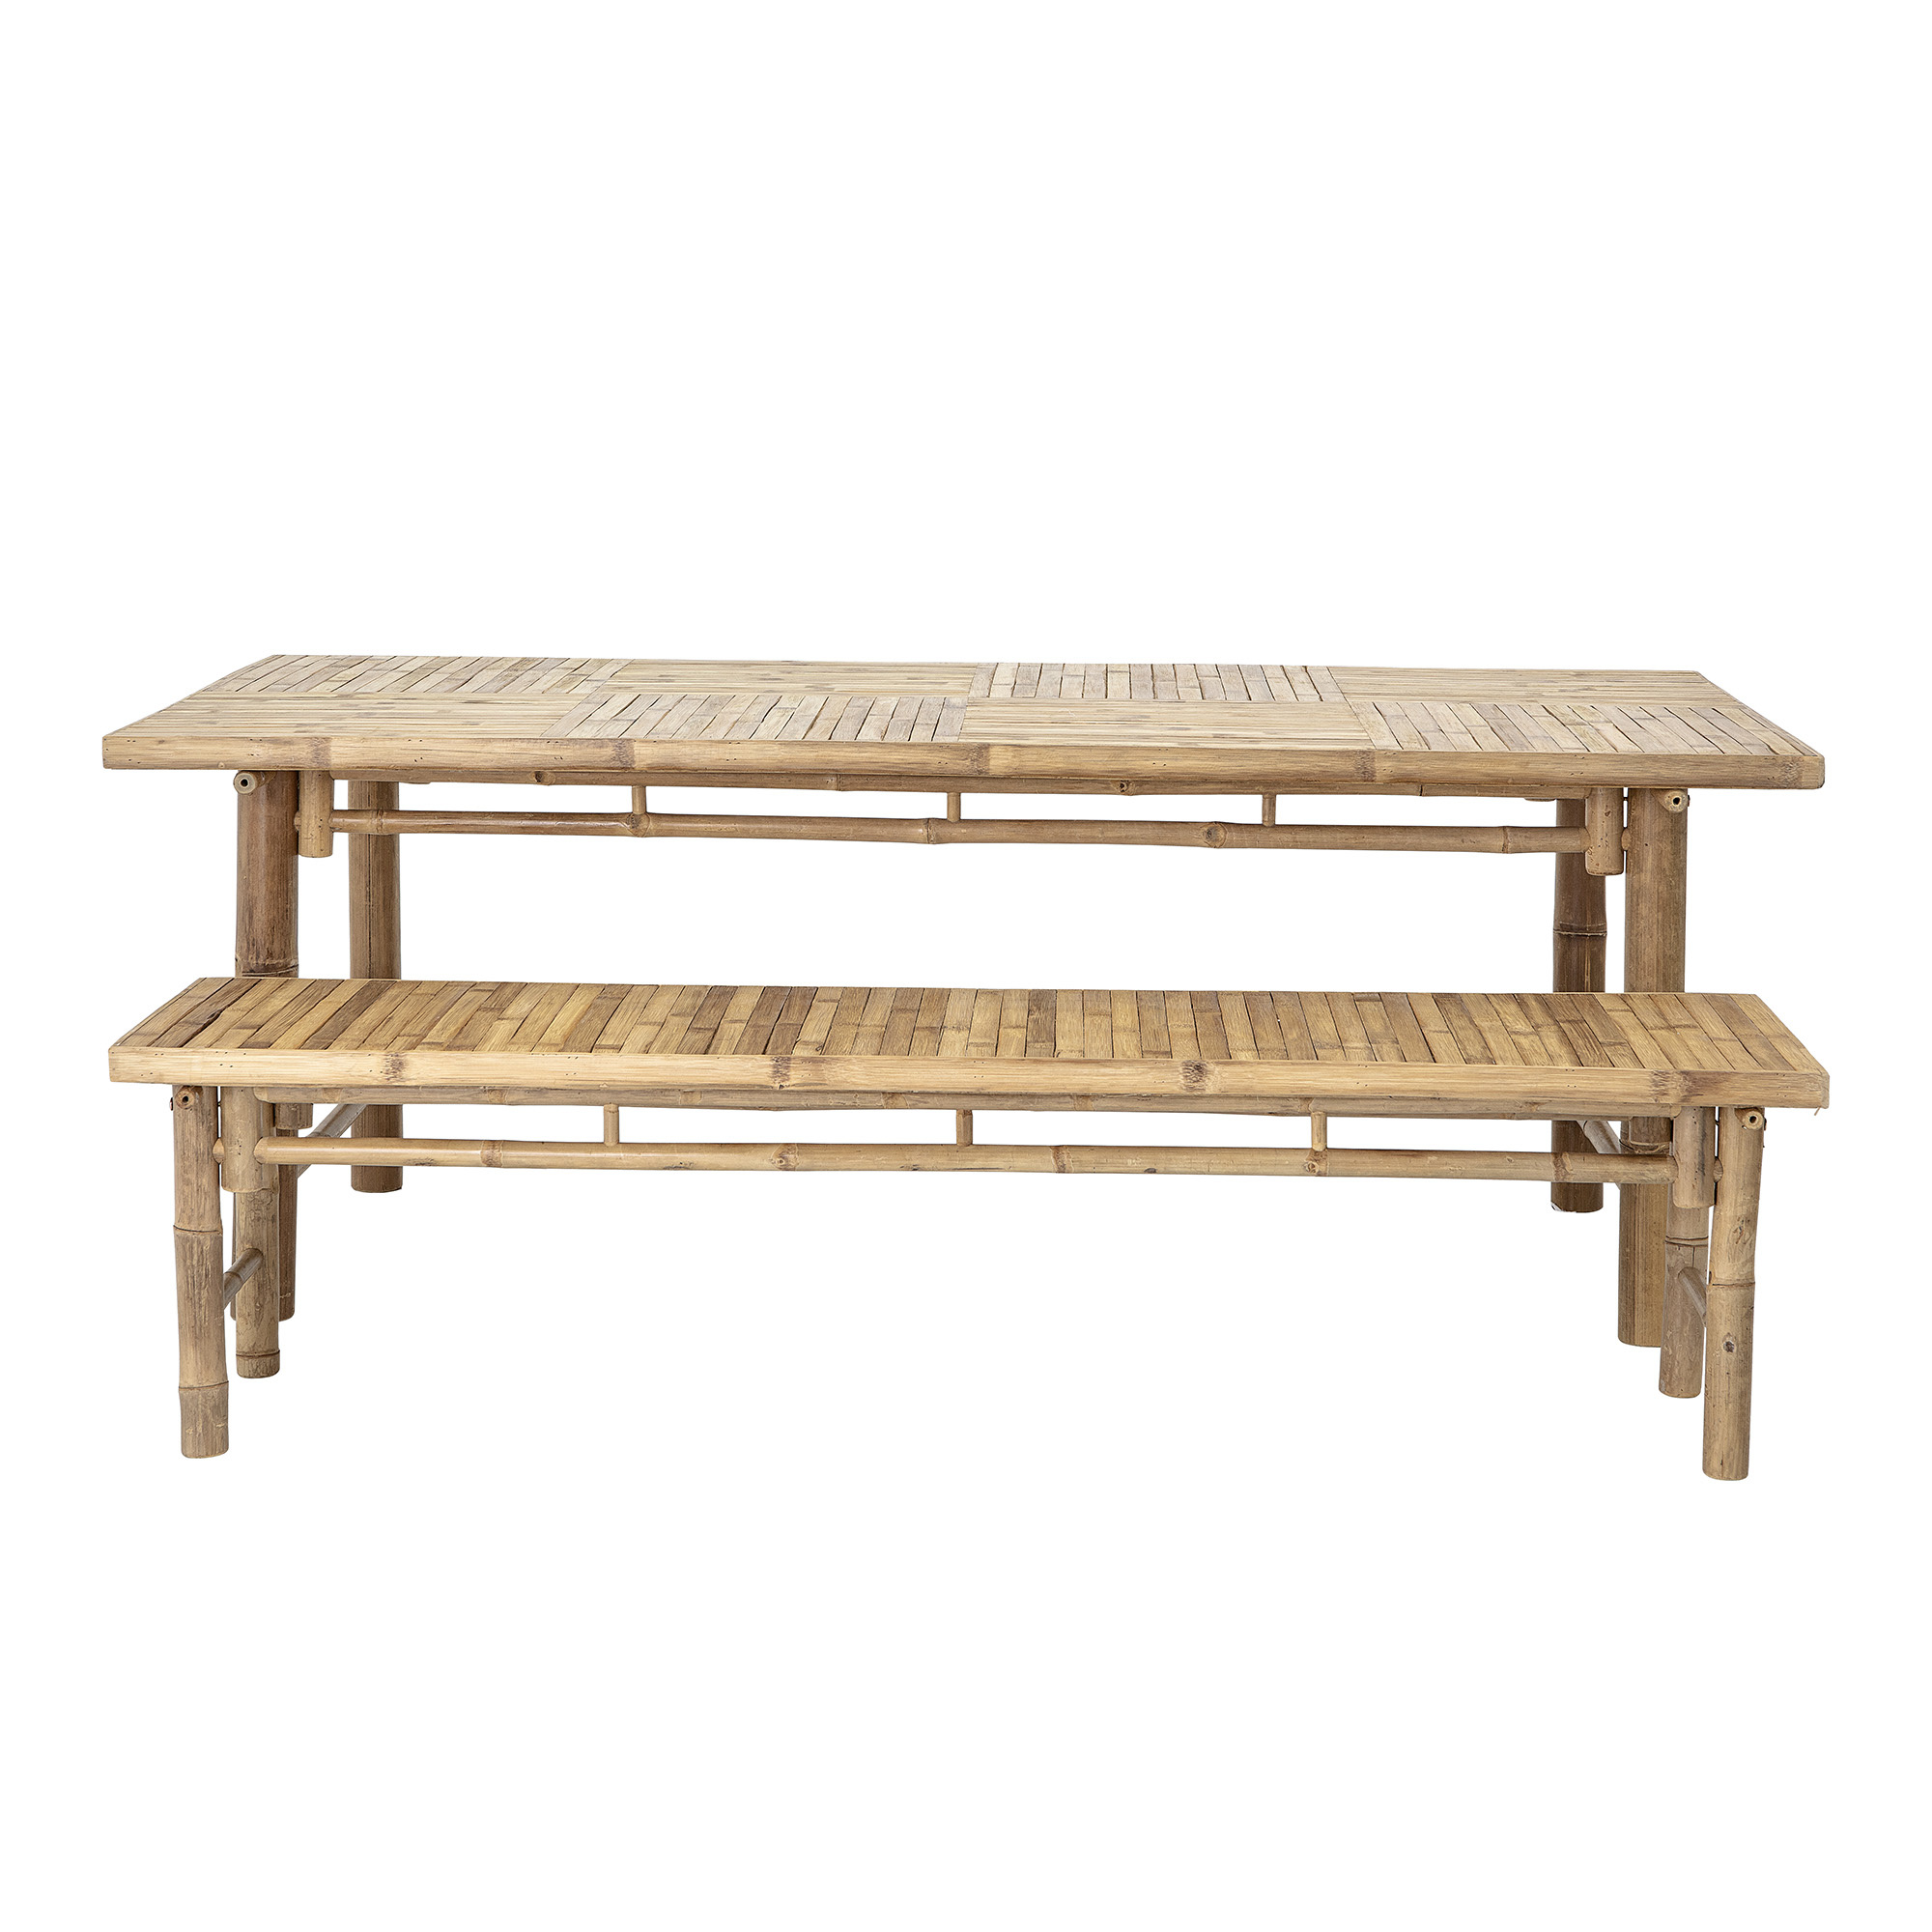 Bloomingville Mandisa Outdoor Dining Table - L200xH74xW100 - Bloomingville